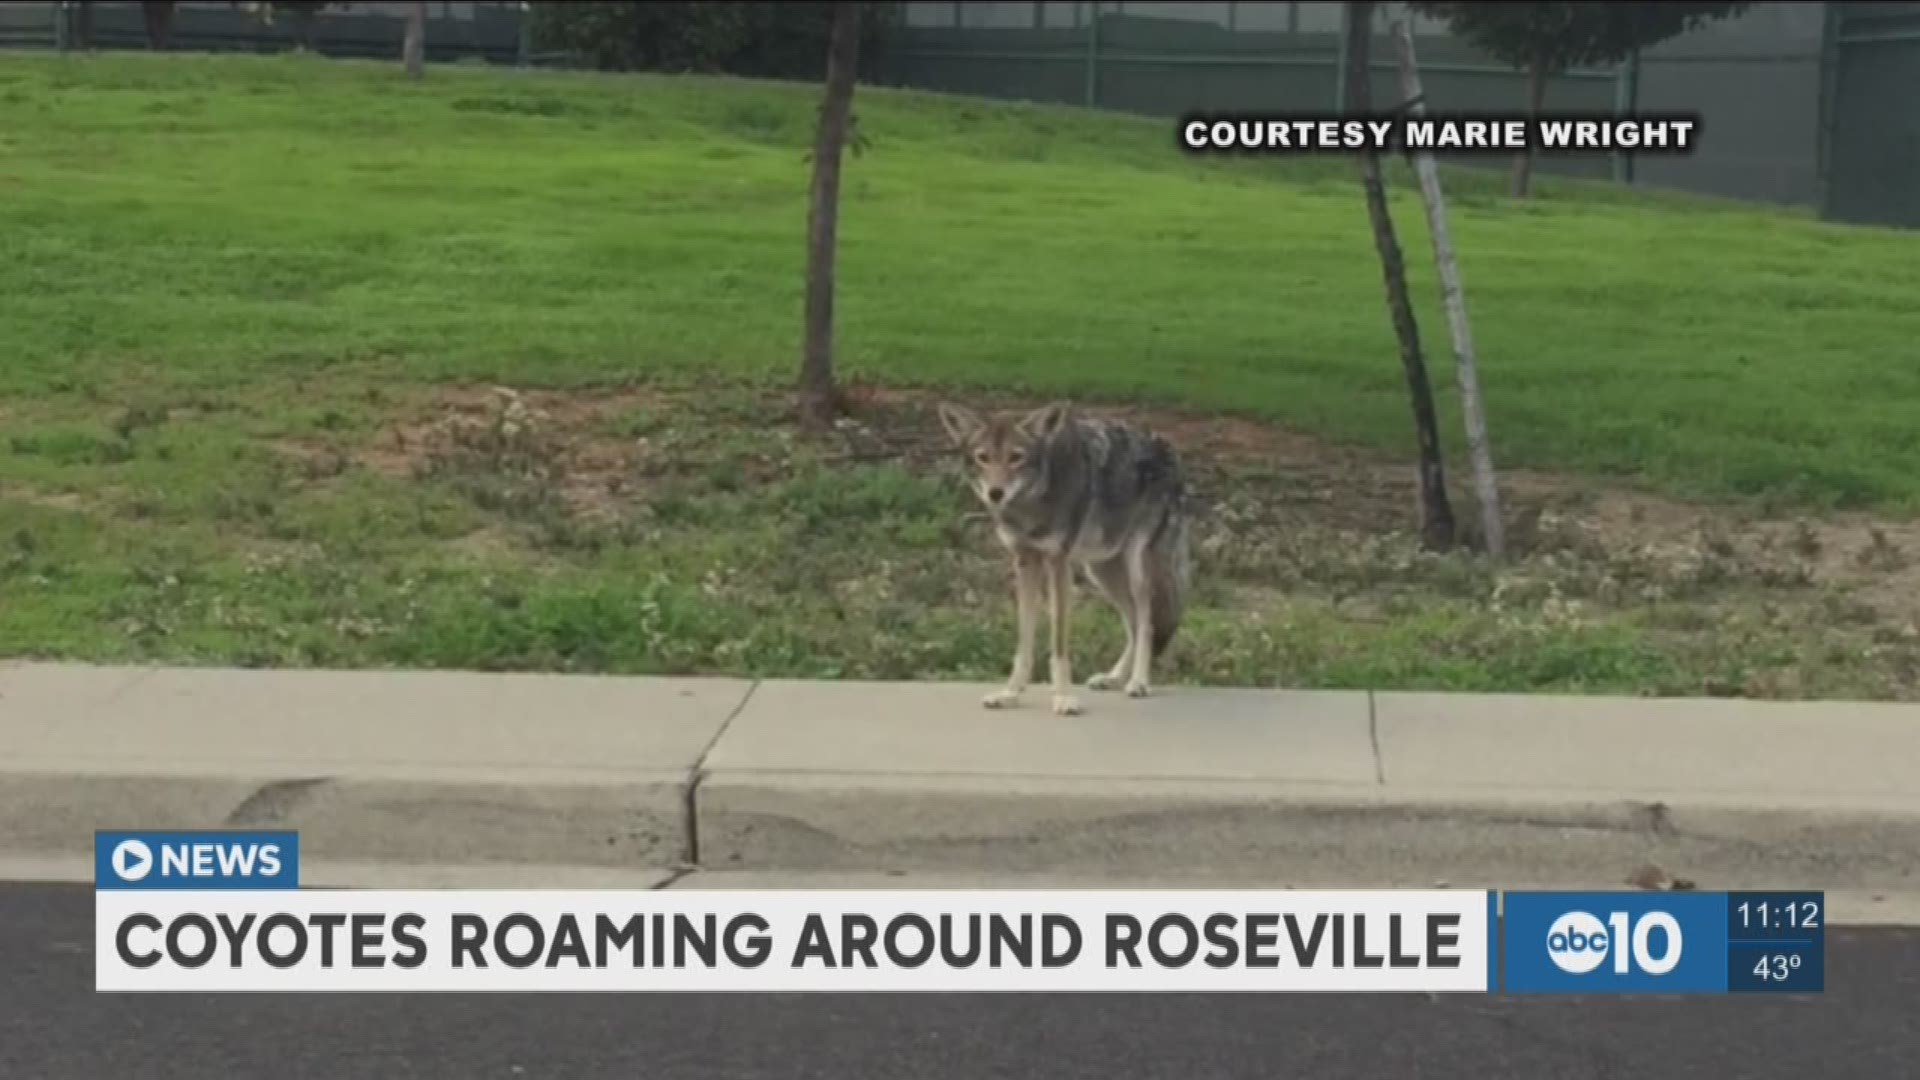 Roseville police say coyotes are normal, not to call dispatch center. (Nov. 16, 2016)